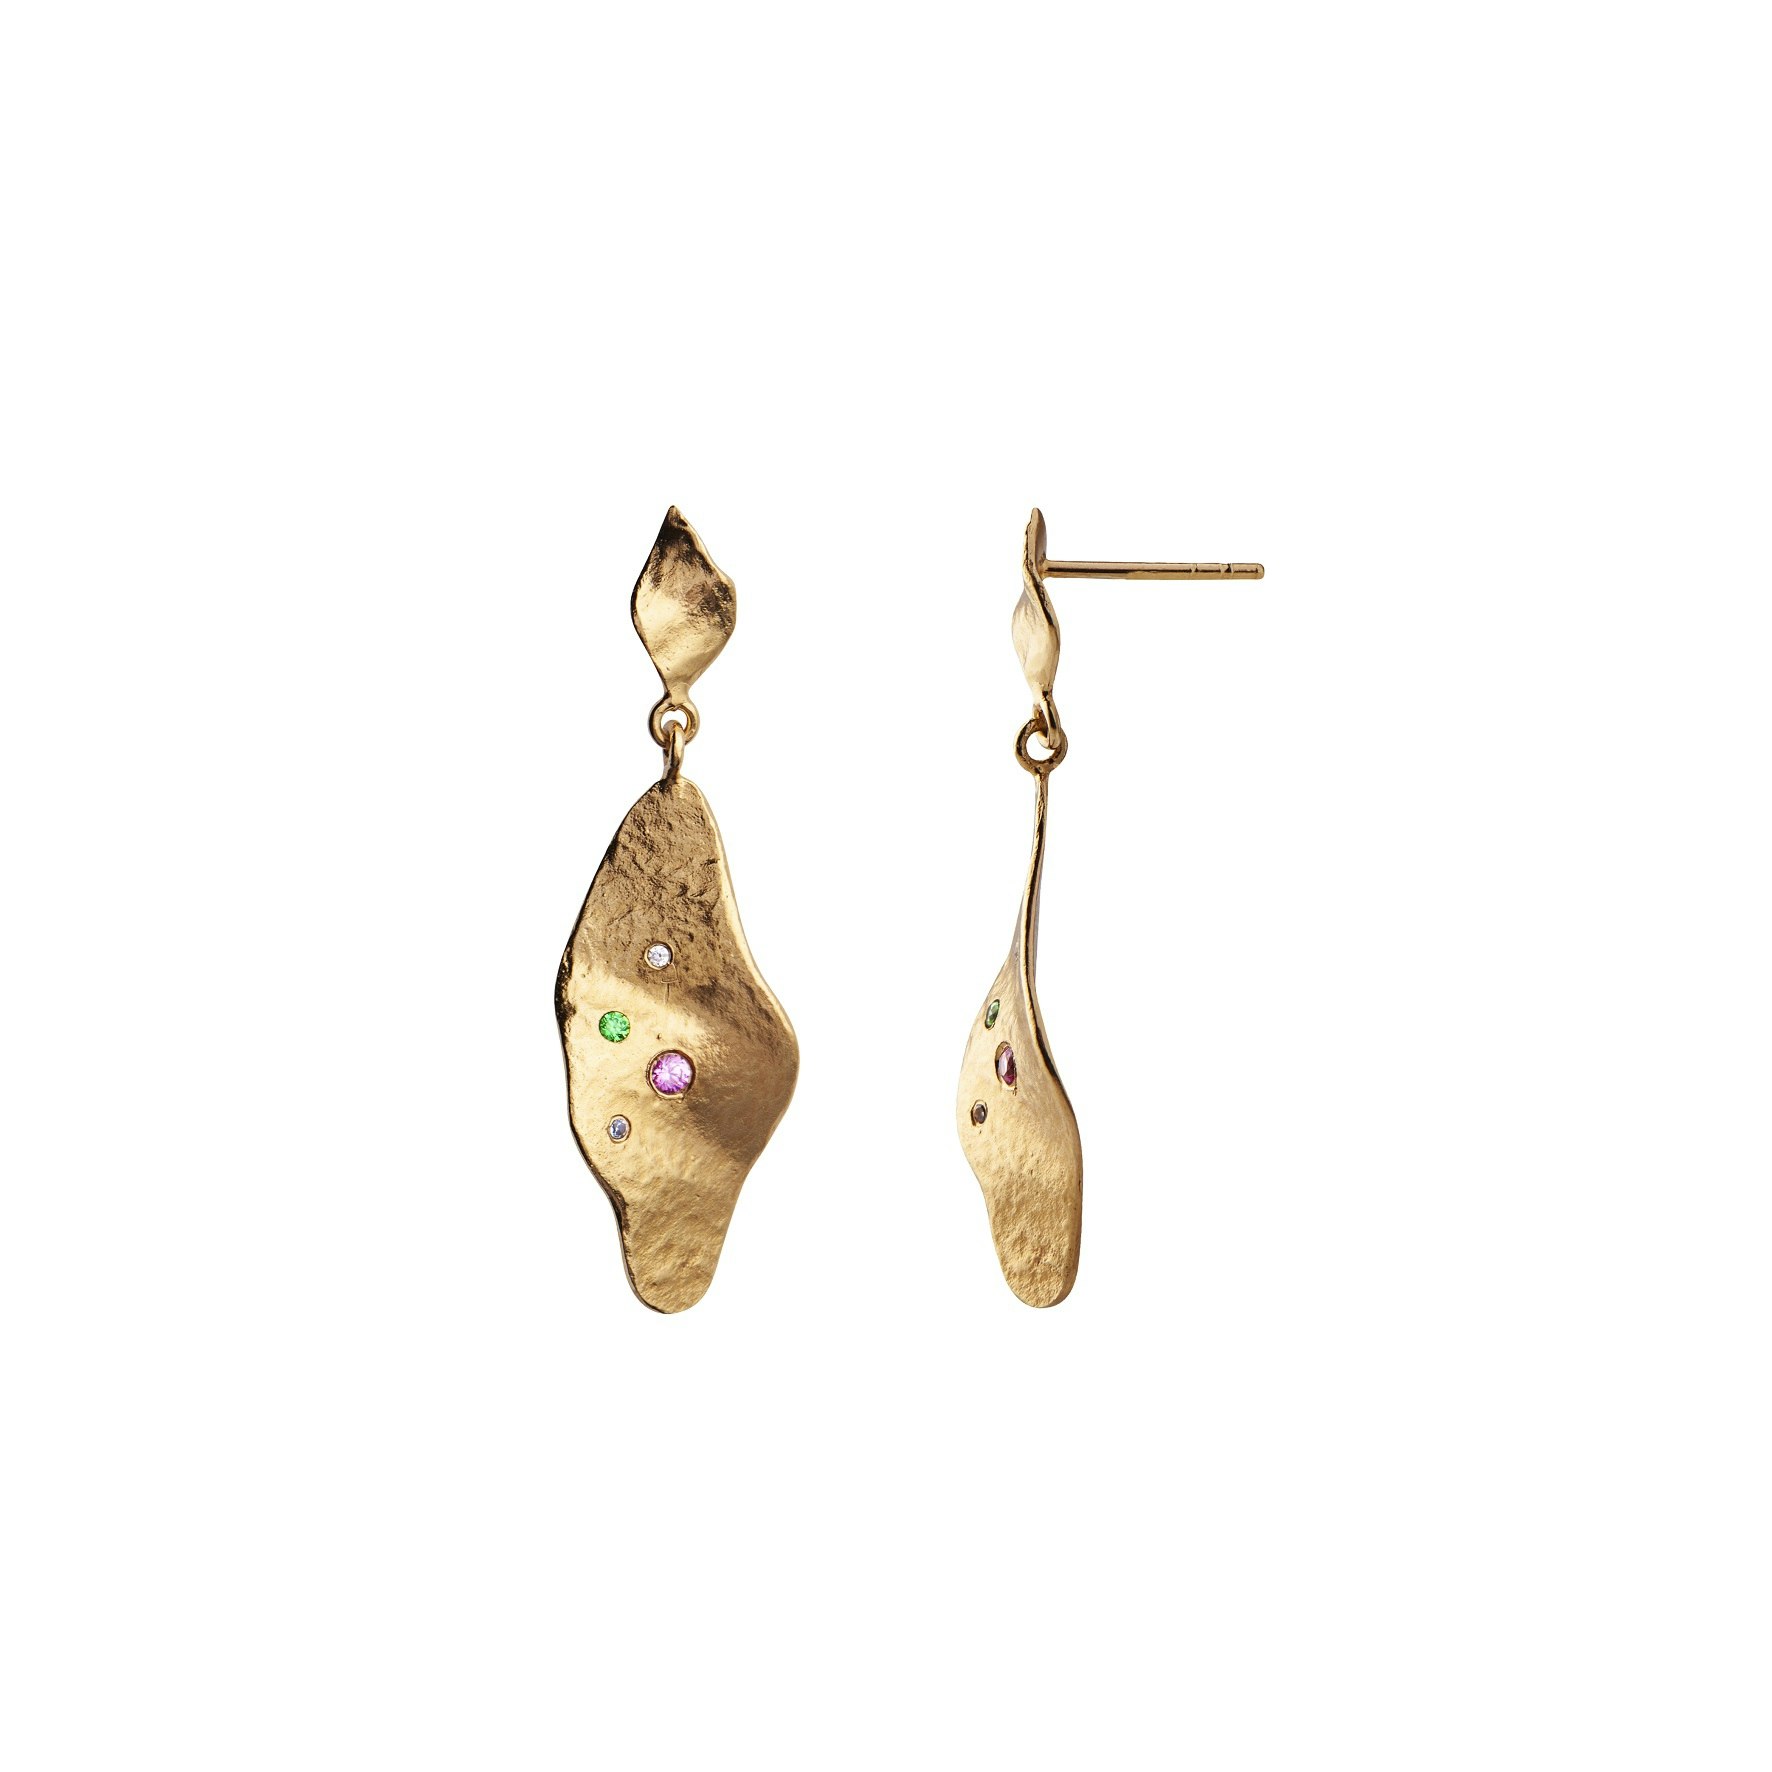 Dangling Ile De L'Amour Earring With Stones from STINE A Jewelry in Goldplated Silver Sterling 925